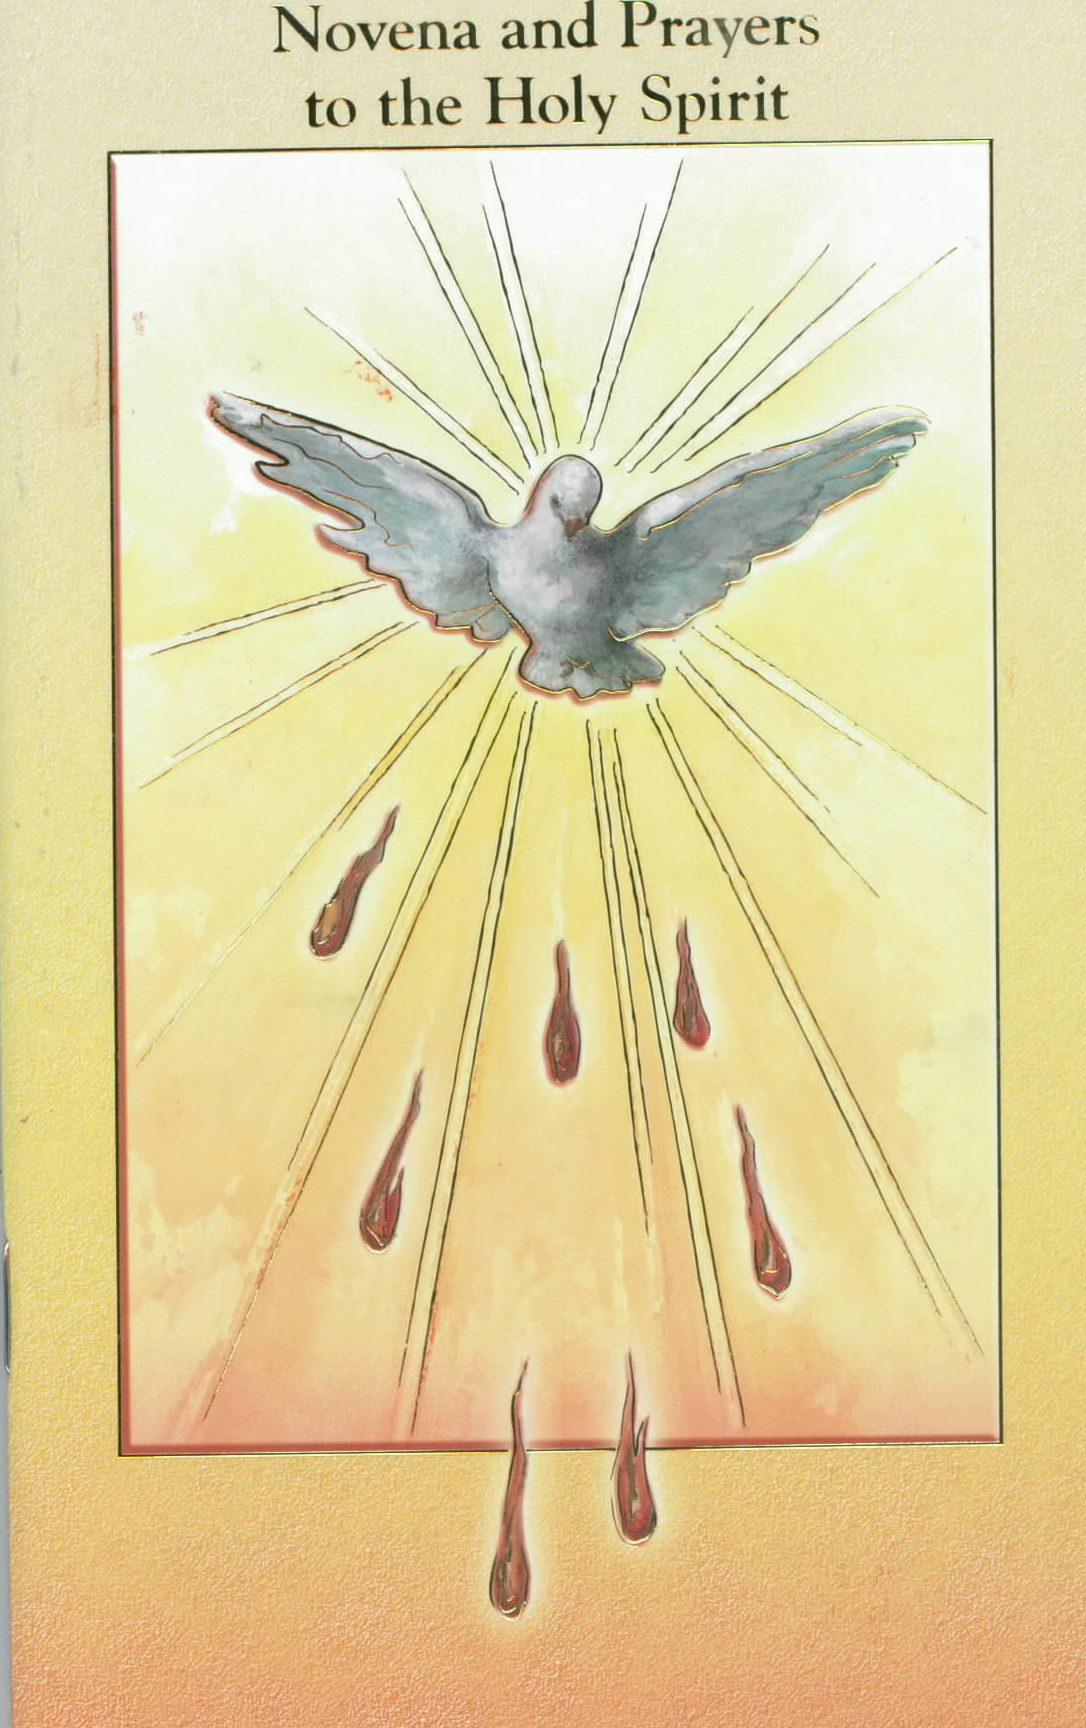 Novena and Prayers to the Holy Spirit Prayer Book 12-2432-65 is 3.75" x 6" and 24 pages beautifully illustrated with Italian Fratelli-Bonella Artwork with origianl text by Daniel A. Lord, S.J.